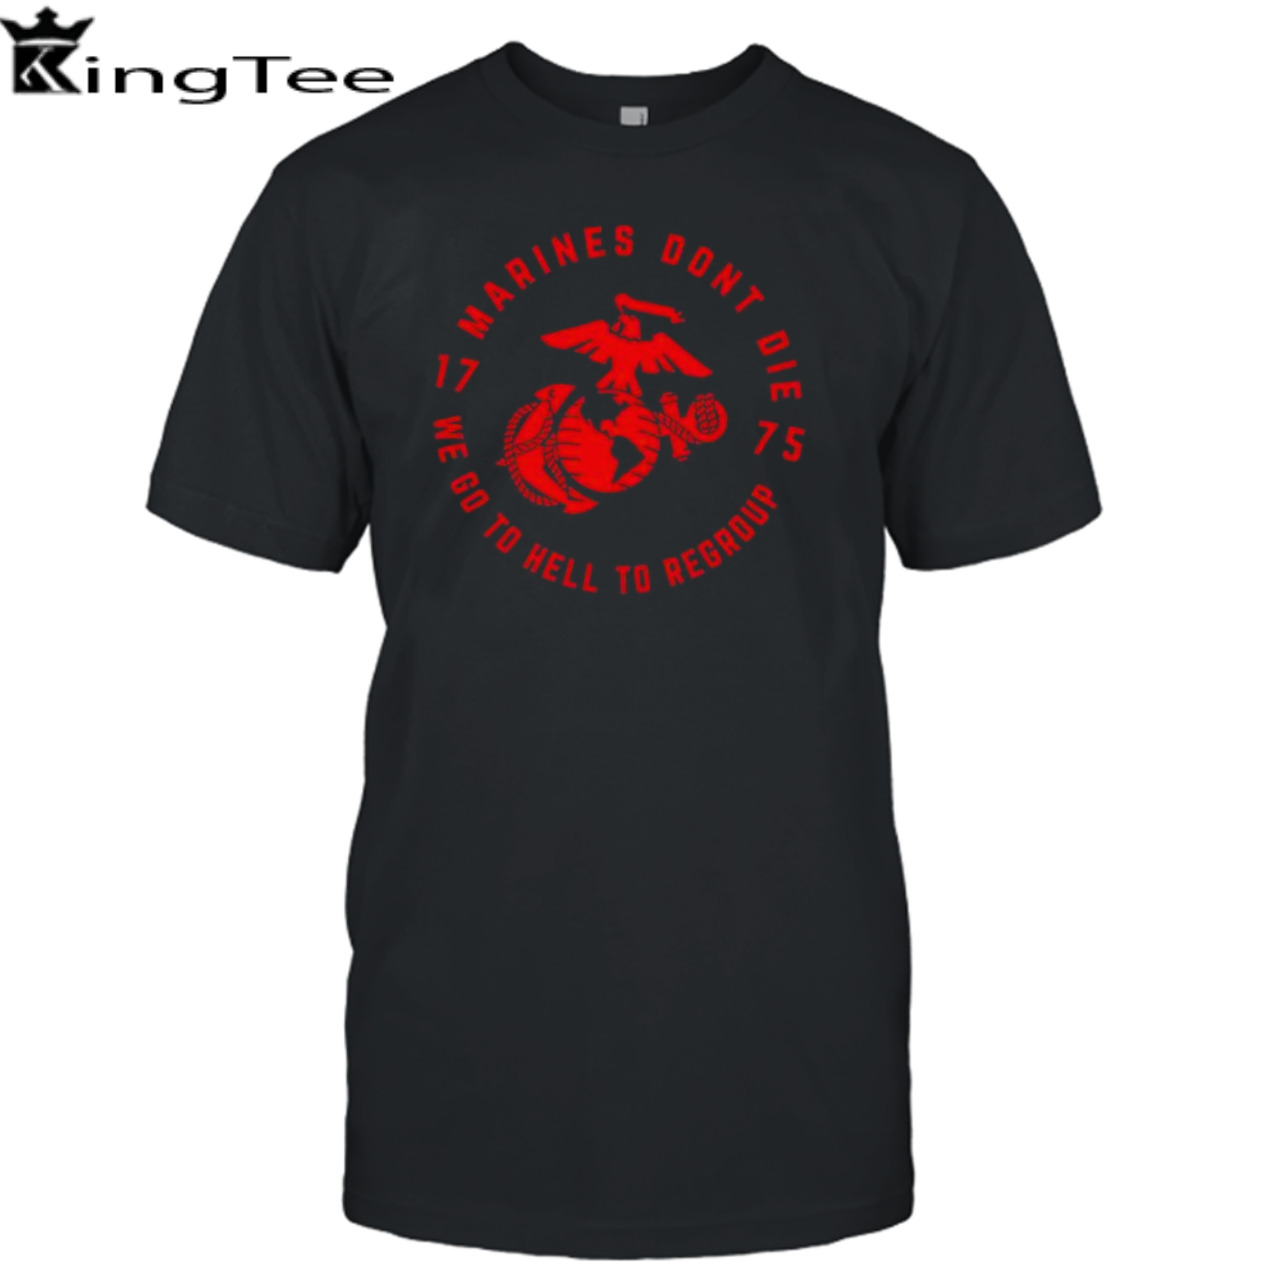 Marines don’t die we go to hell to regroup 1775 t-shirt